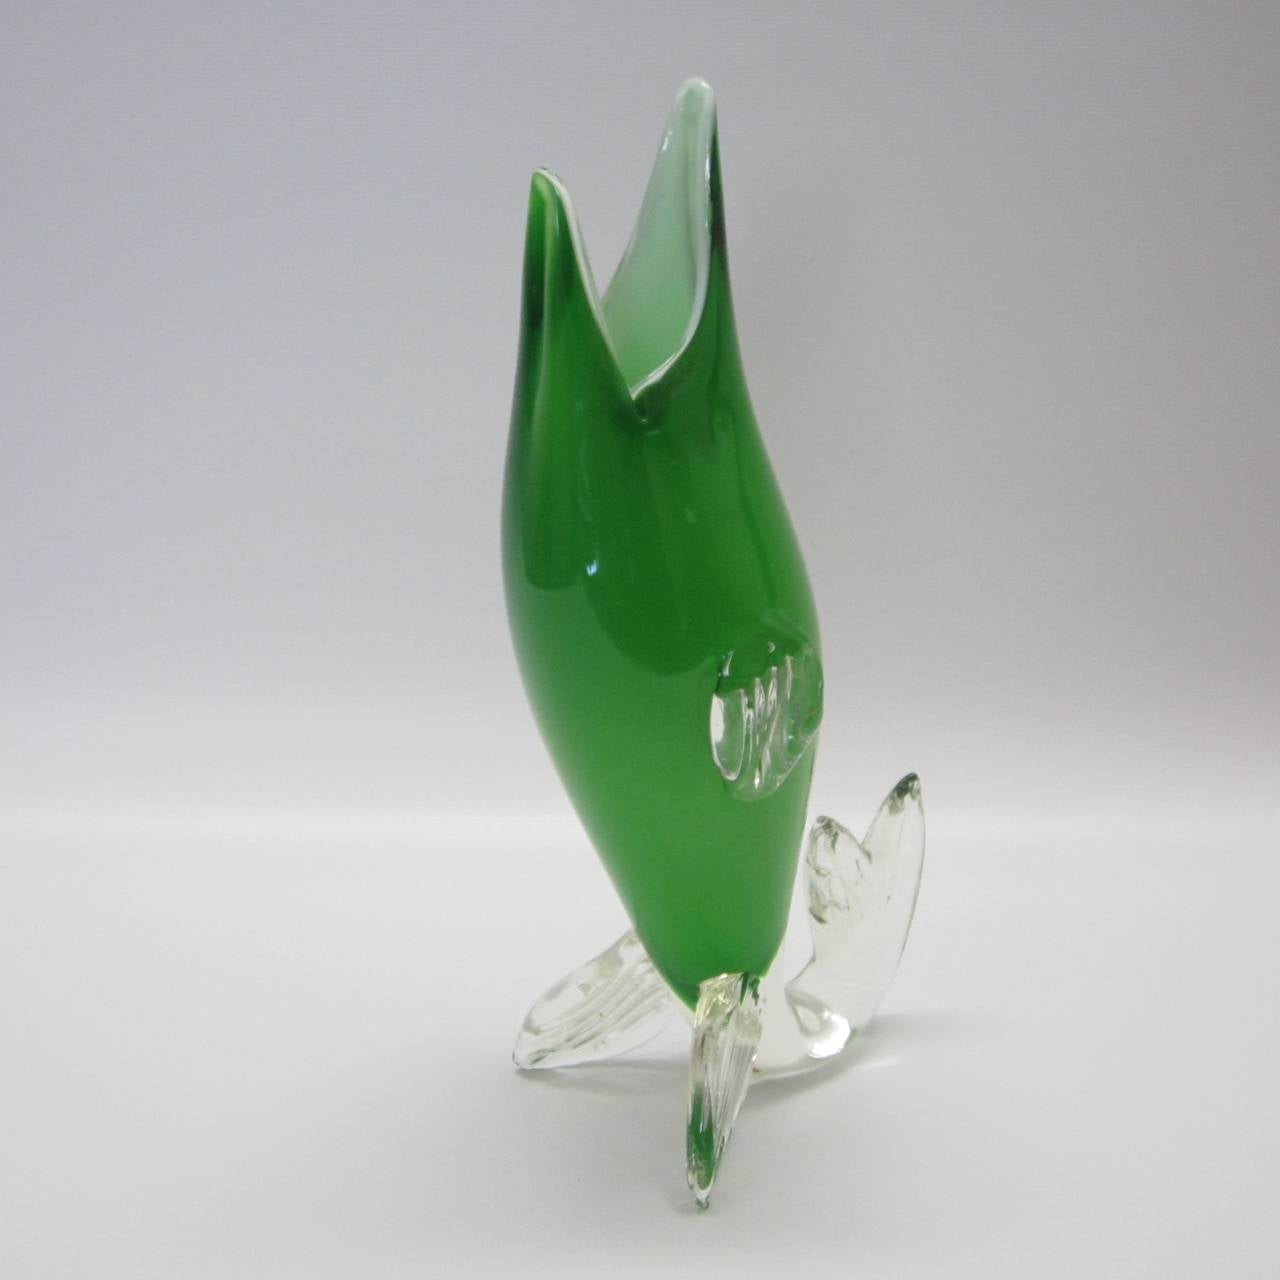 Gorgeous green Murano glass fish vase resting on clear fins. Can be displayed laying down as well.